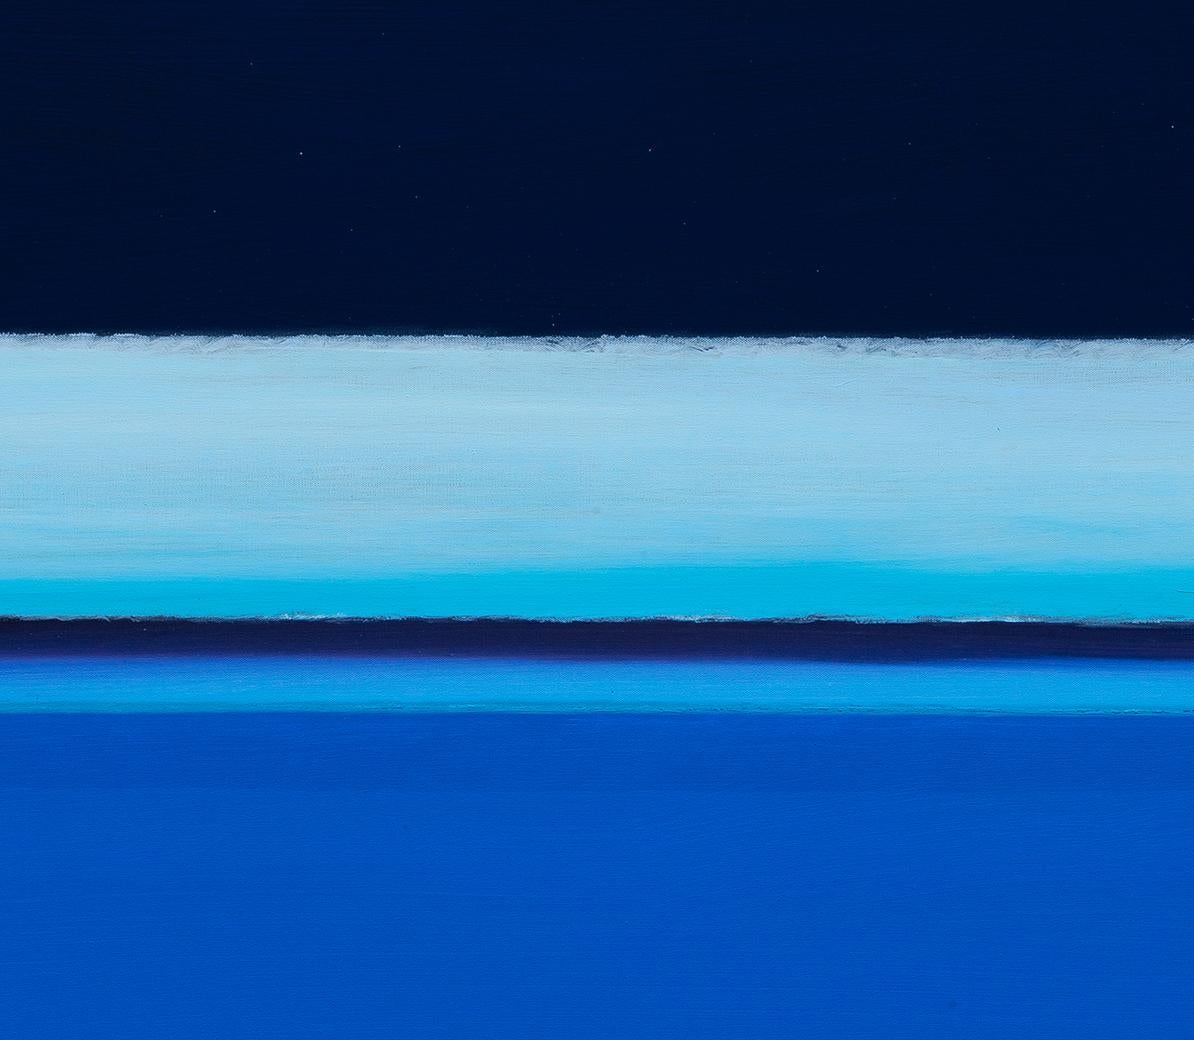 River of Dreams II: abstract landscape painting with blue water and night sky - Painting by Joseph McAleer